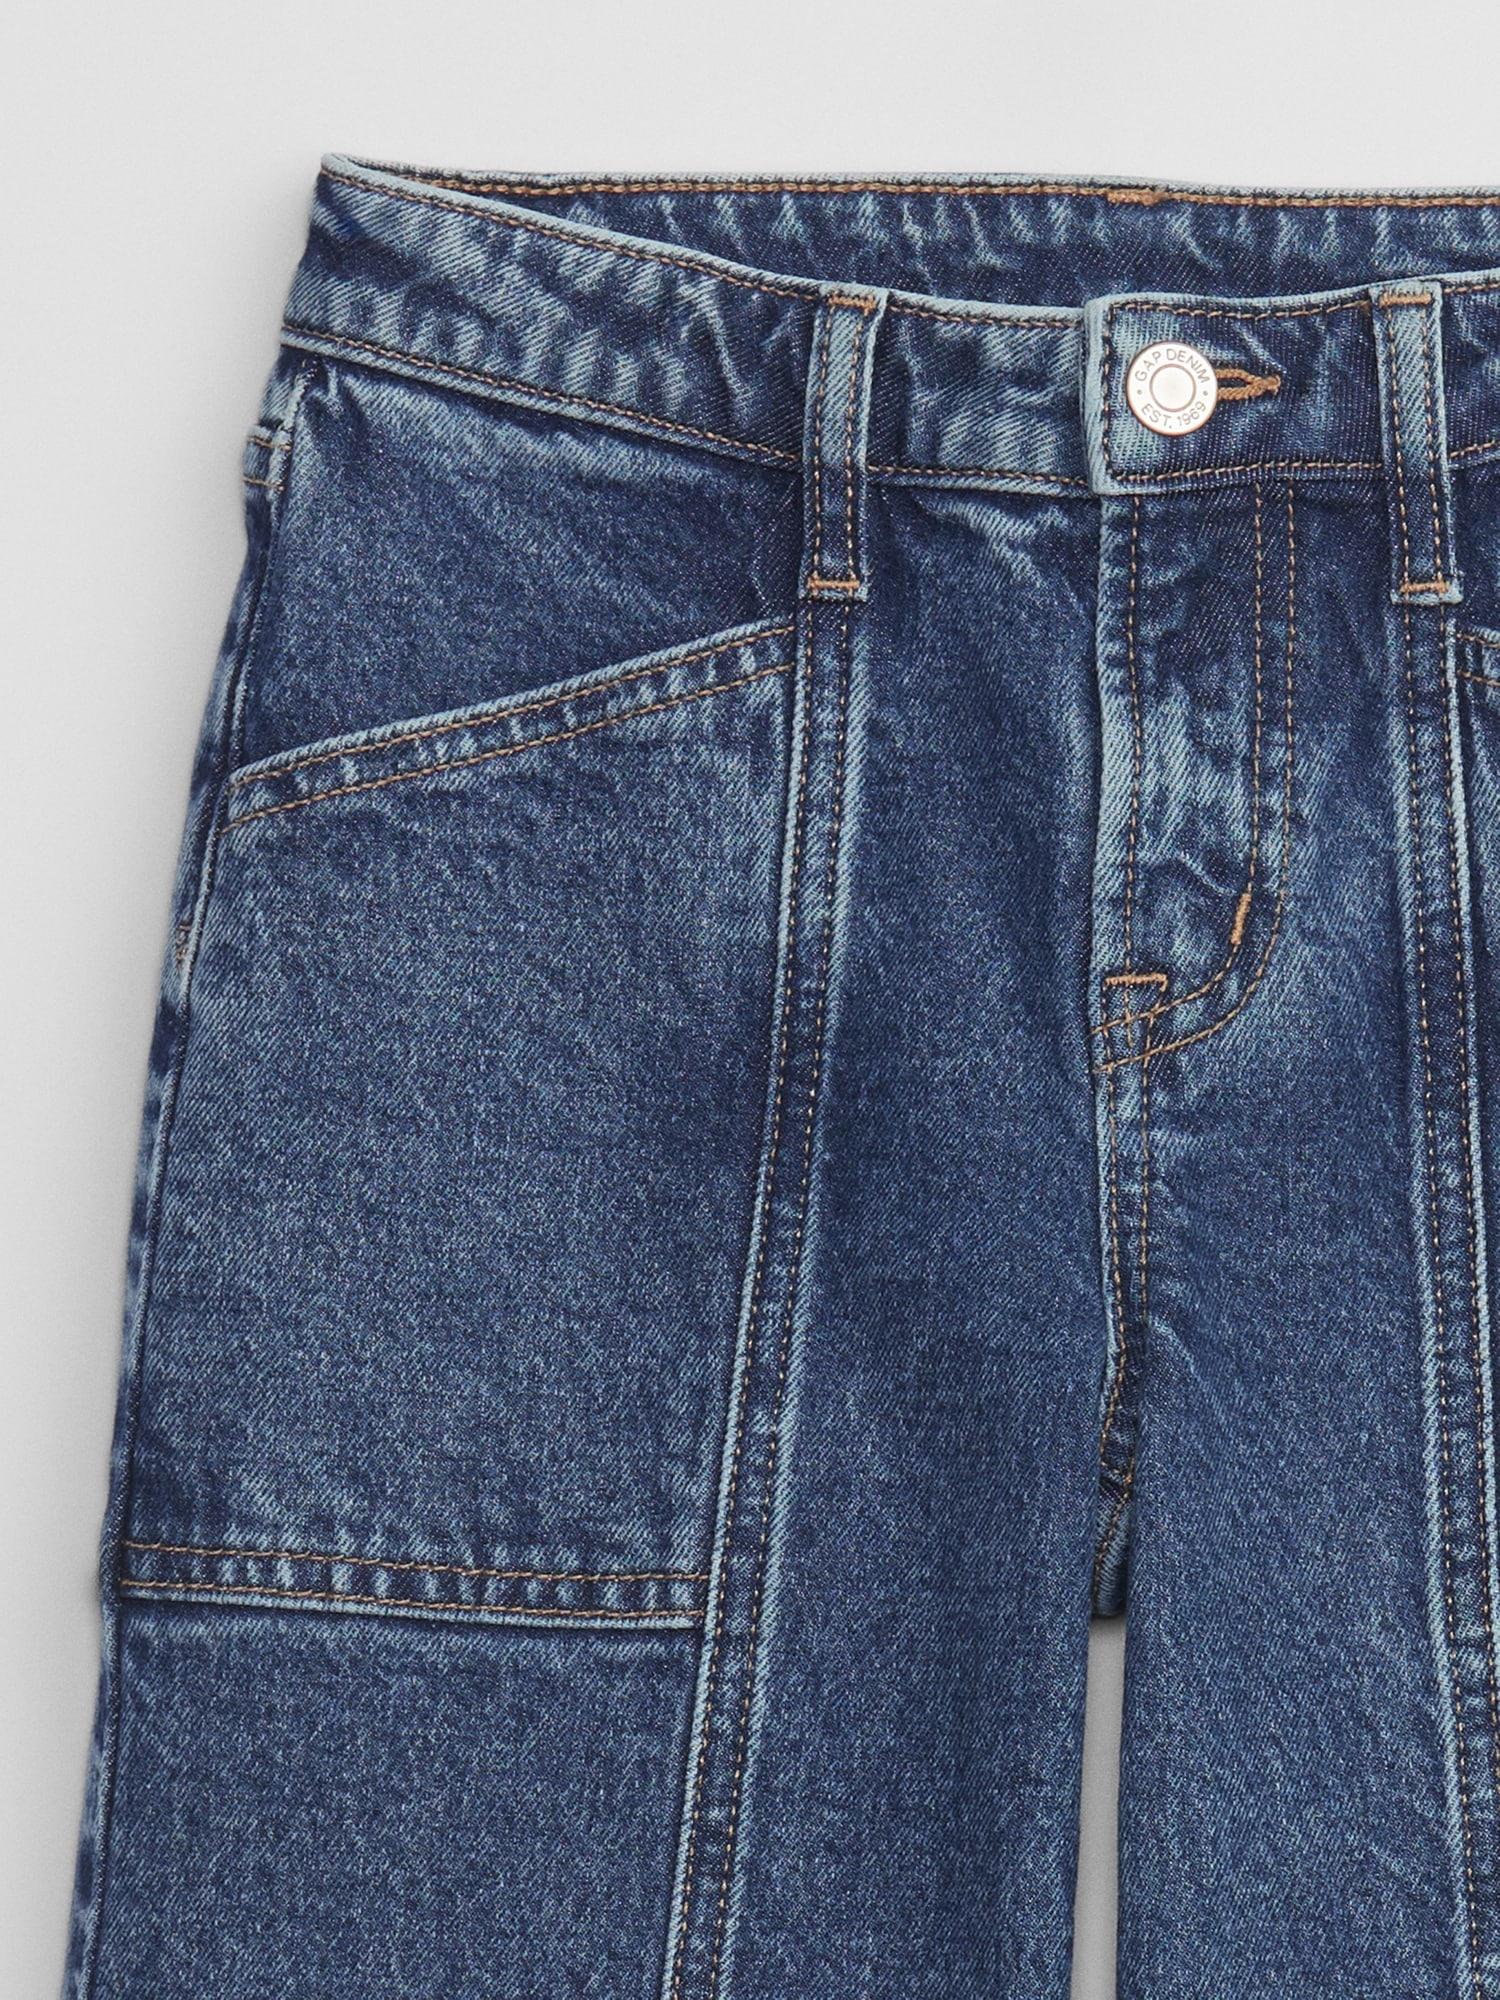 Kids High Rise Wide-Leg Ankle Jeans | Gap Factory